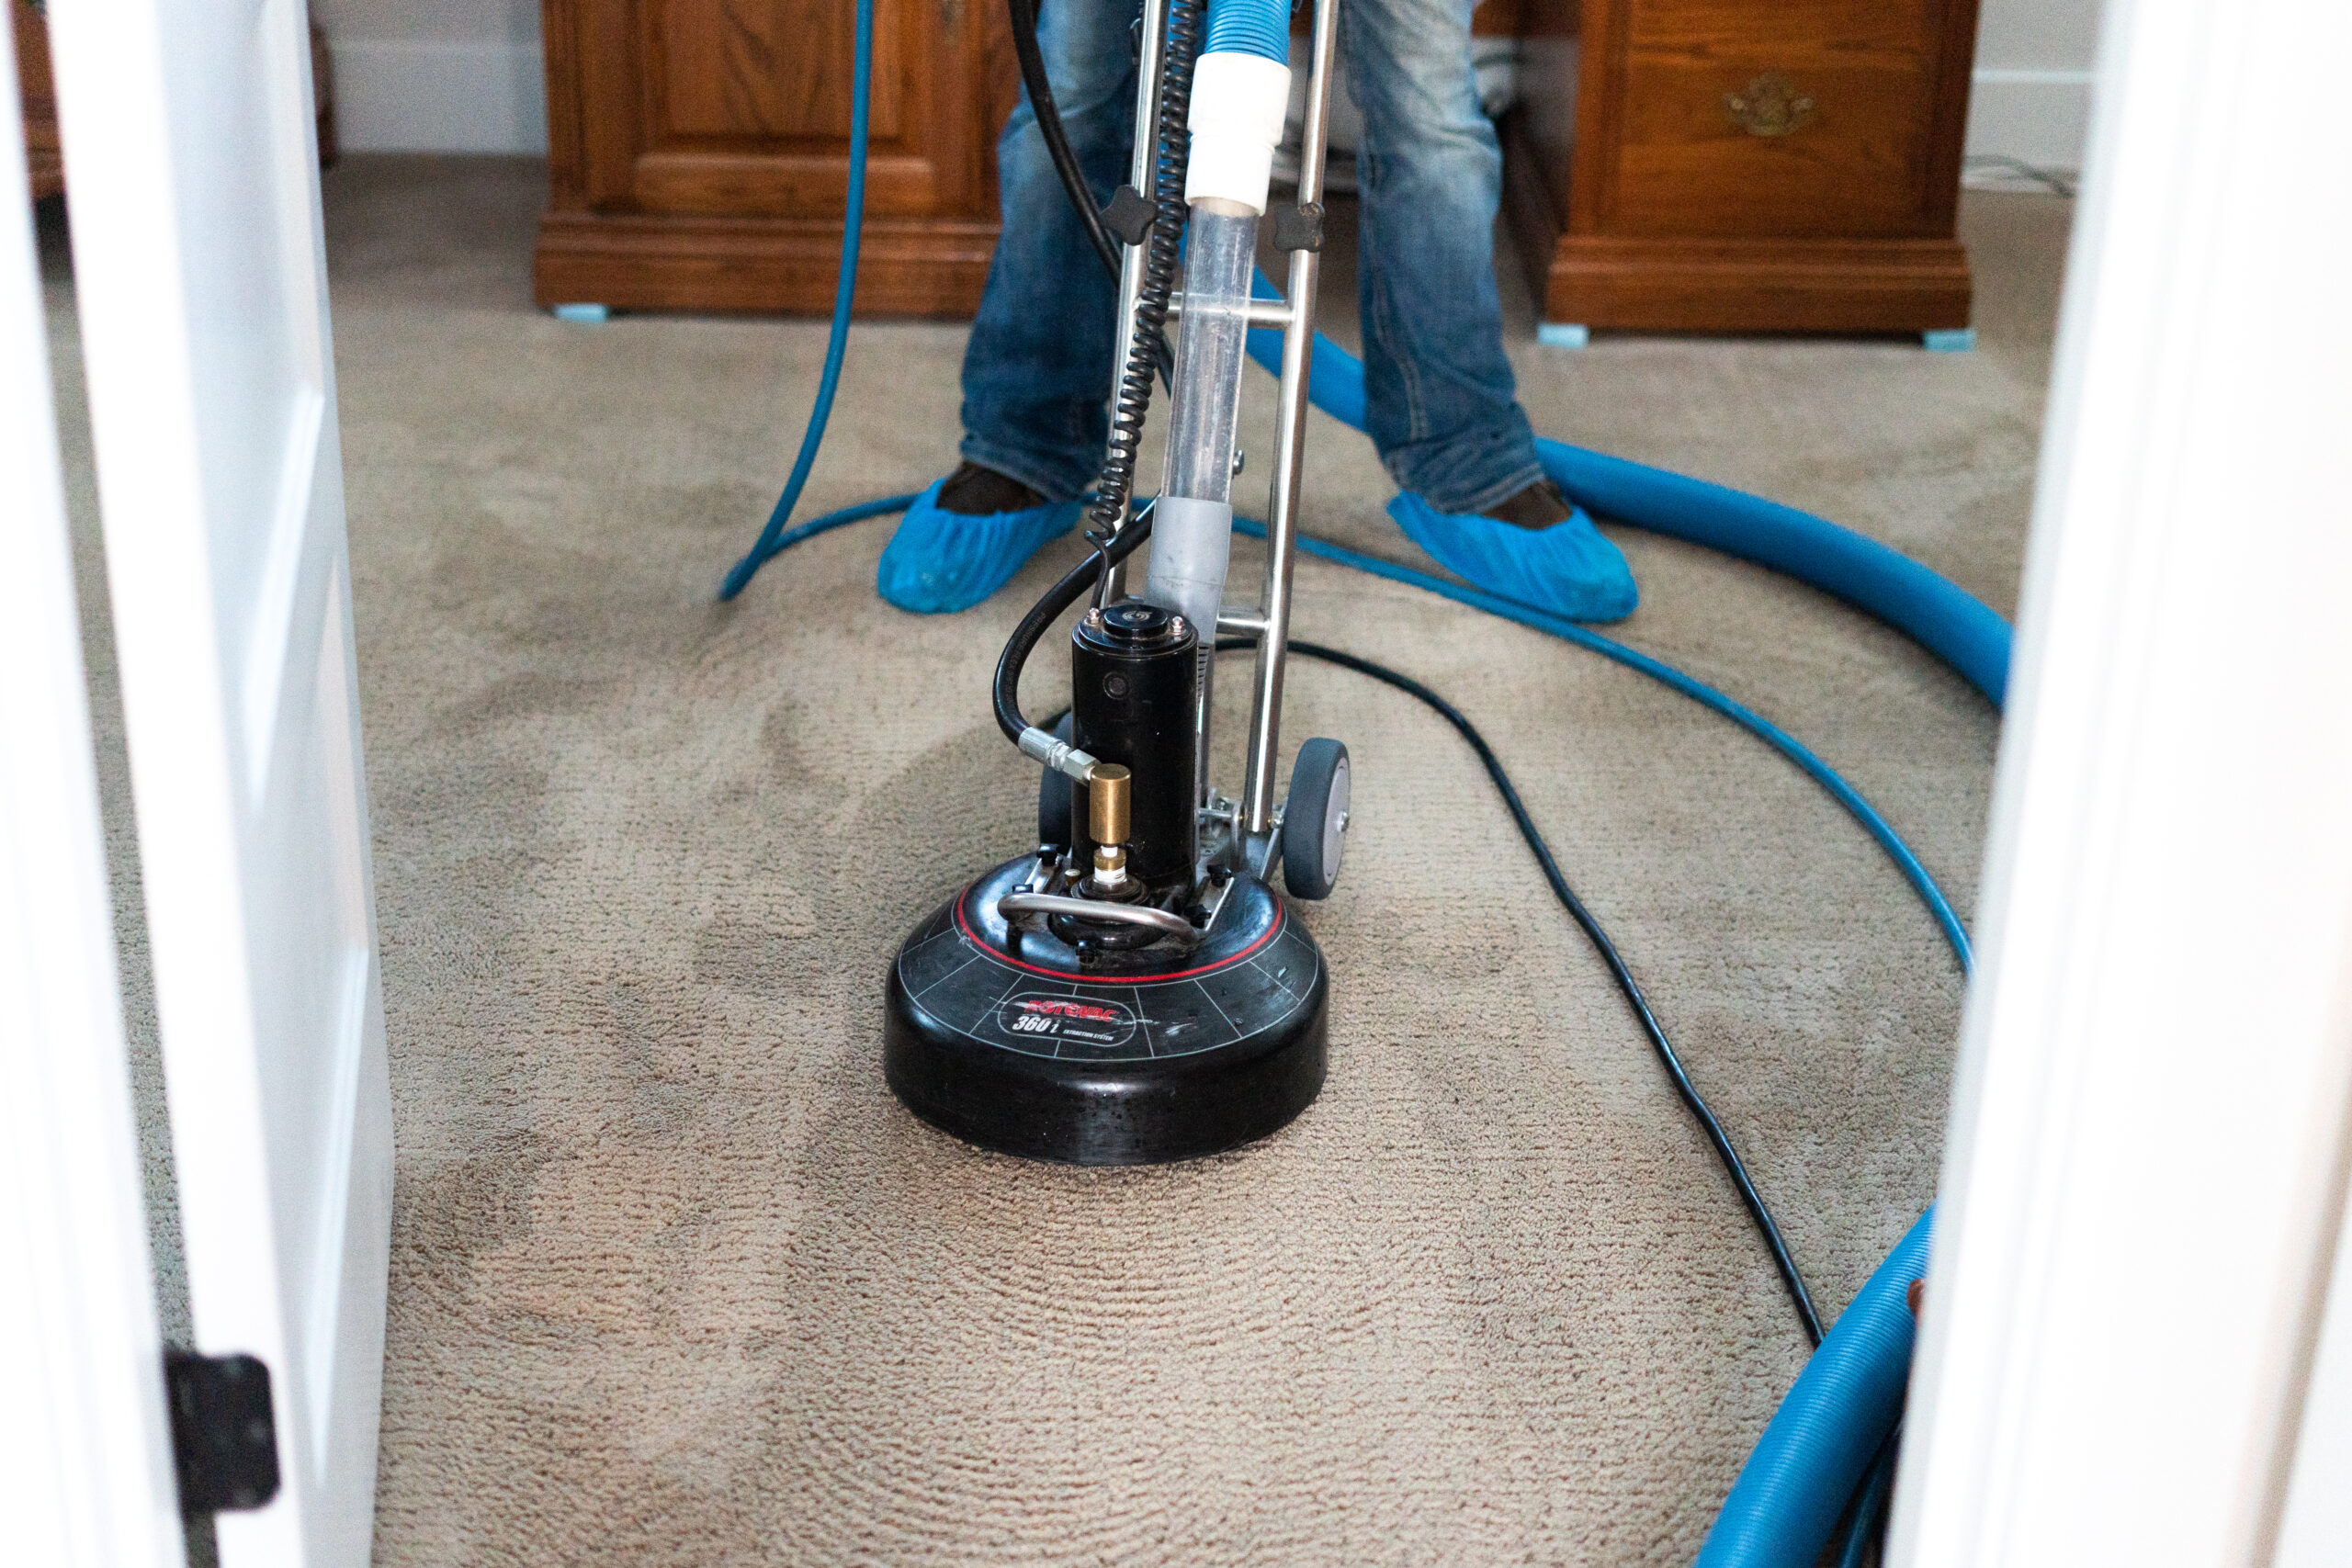 eco-friendly carpet cleaning profession, green cleans carpet fibers